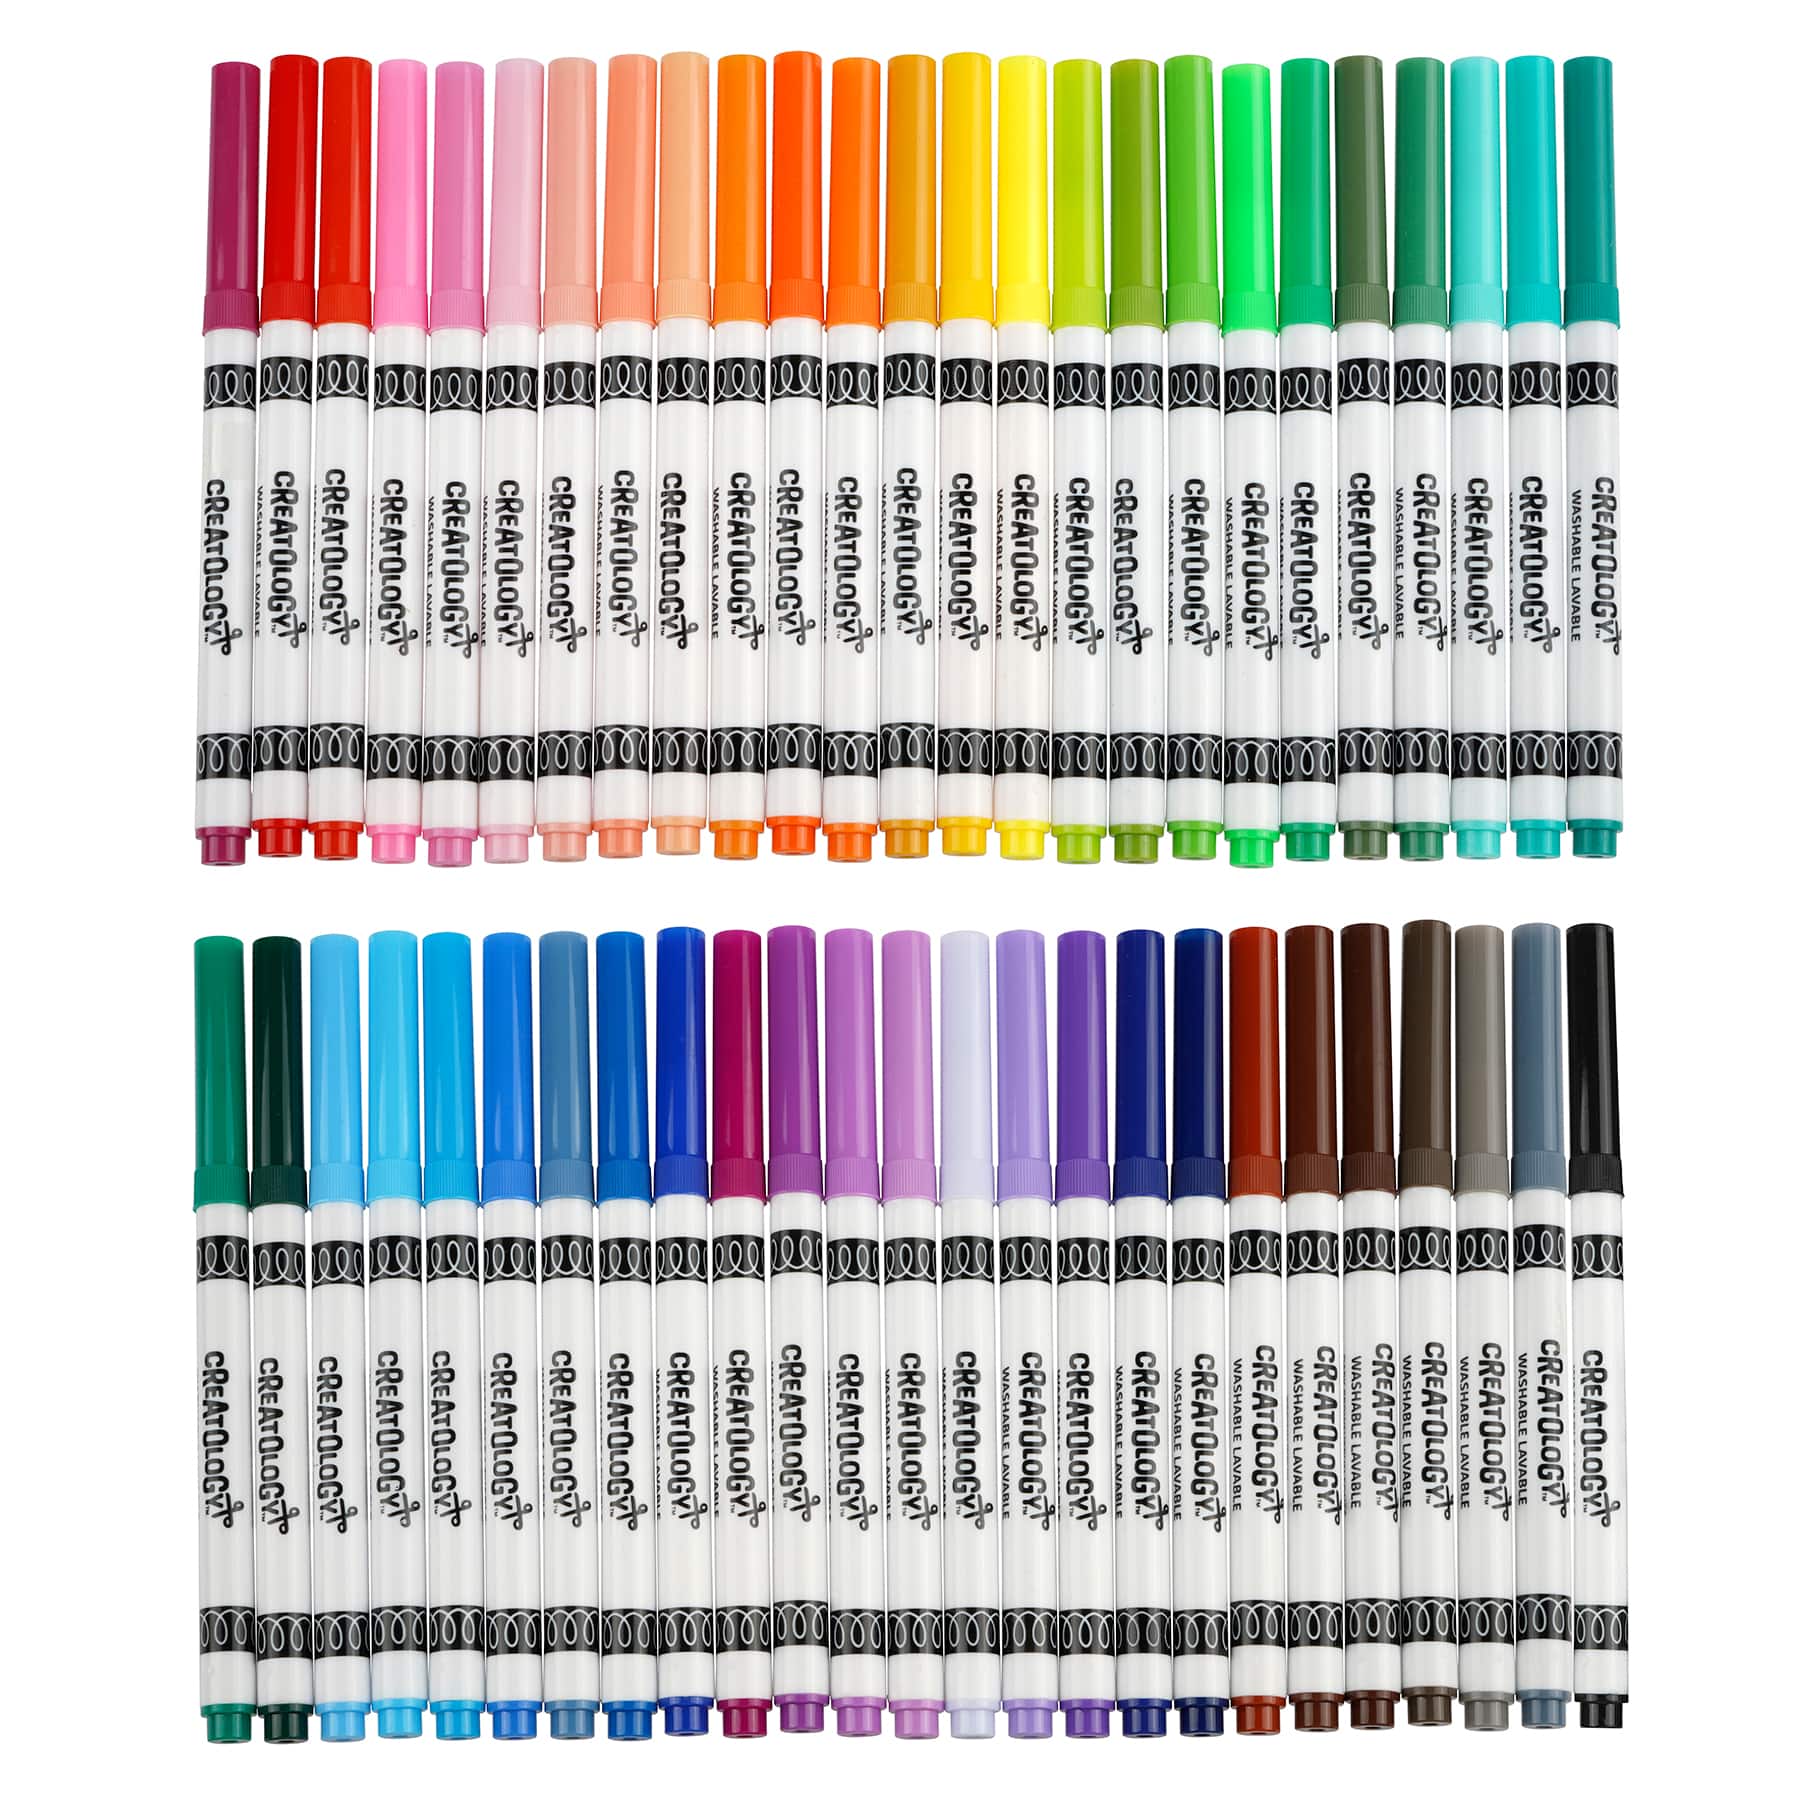  Ohuhu Markers for Adult Coloring Books: 64 Colors Art Markers  Dual Brush Chisel Tips Drawing Pens Water-Based Coloring Markers for Kids  Adults Calligraphy Sketching Bullet Journal with Storage Case : Arts